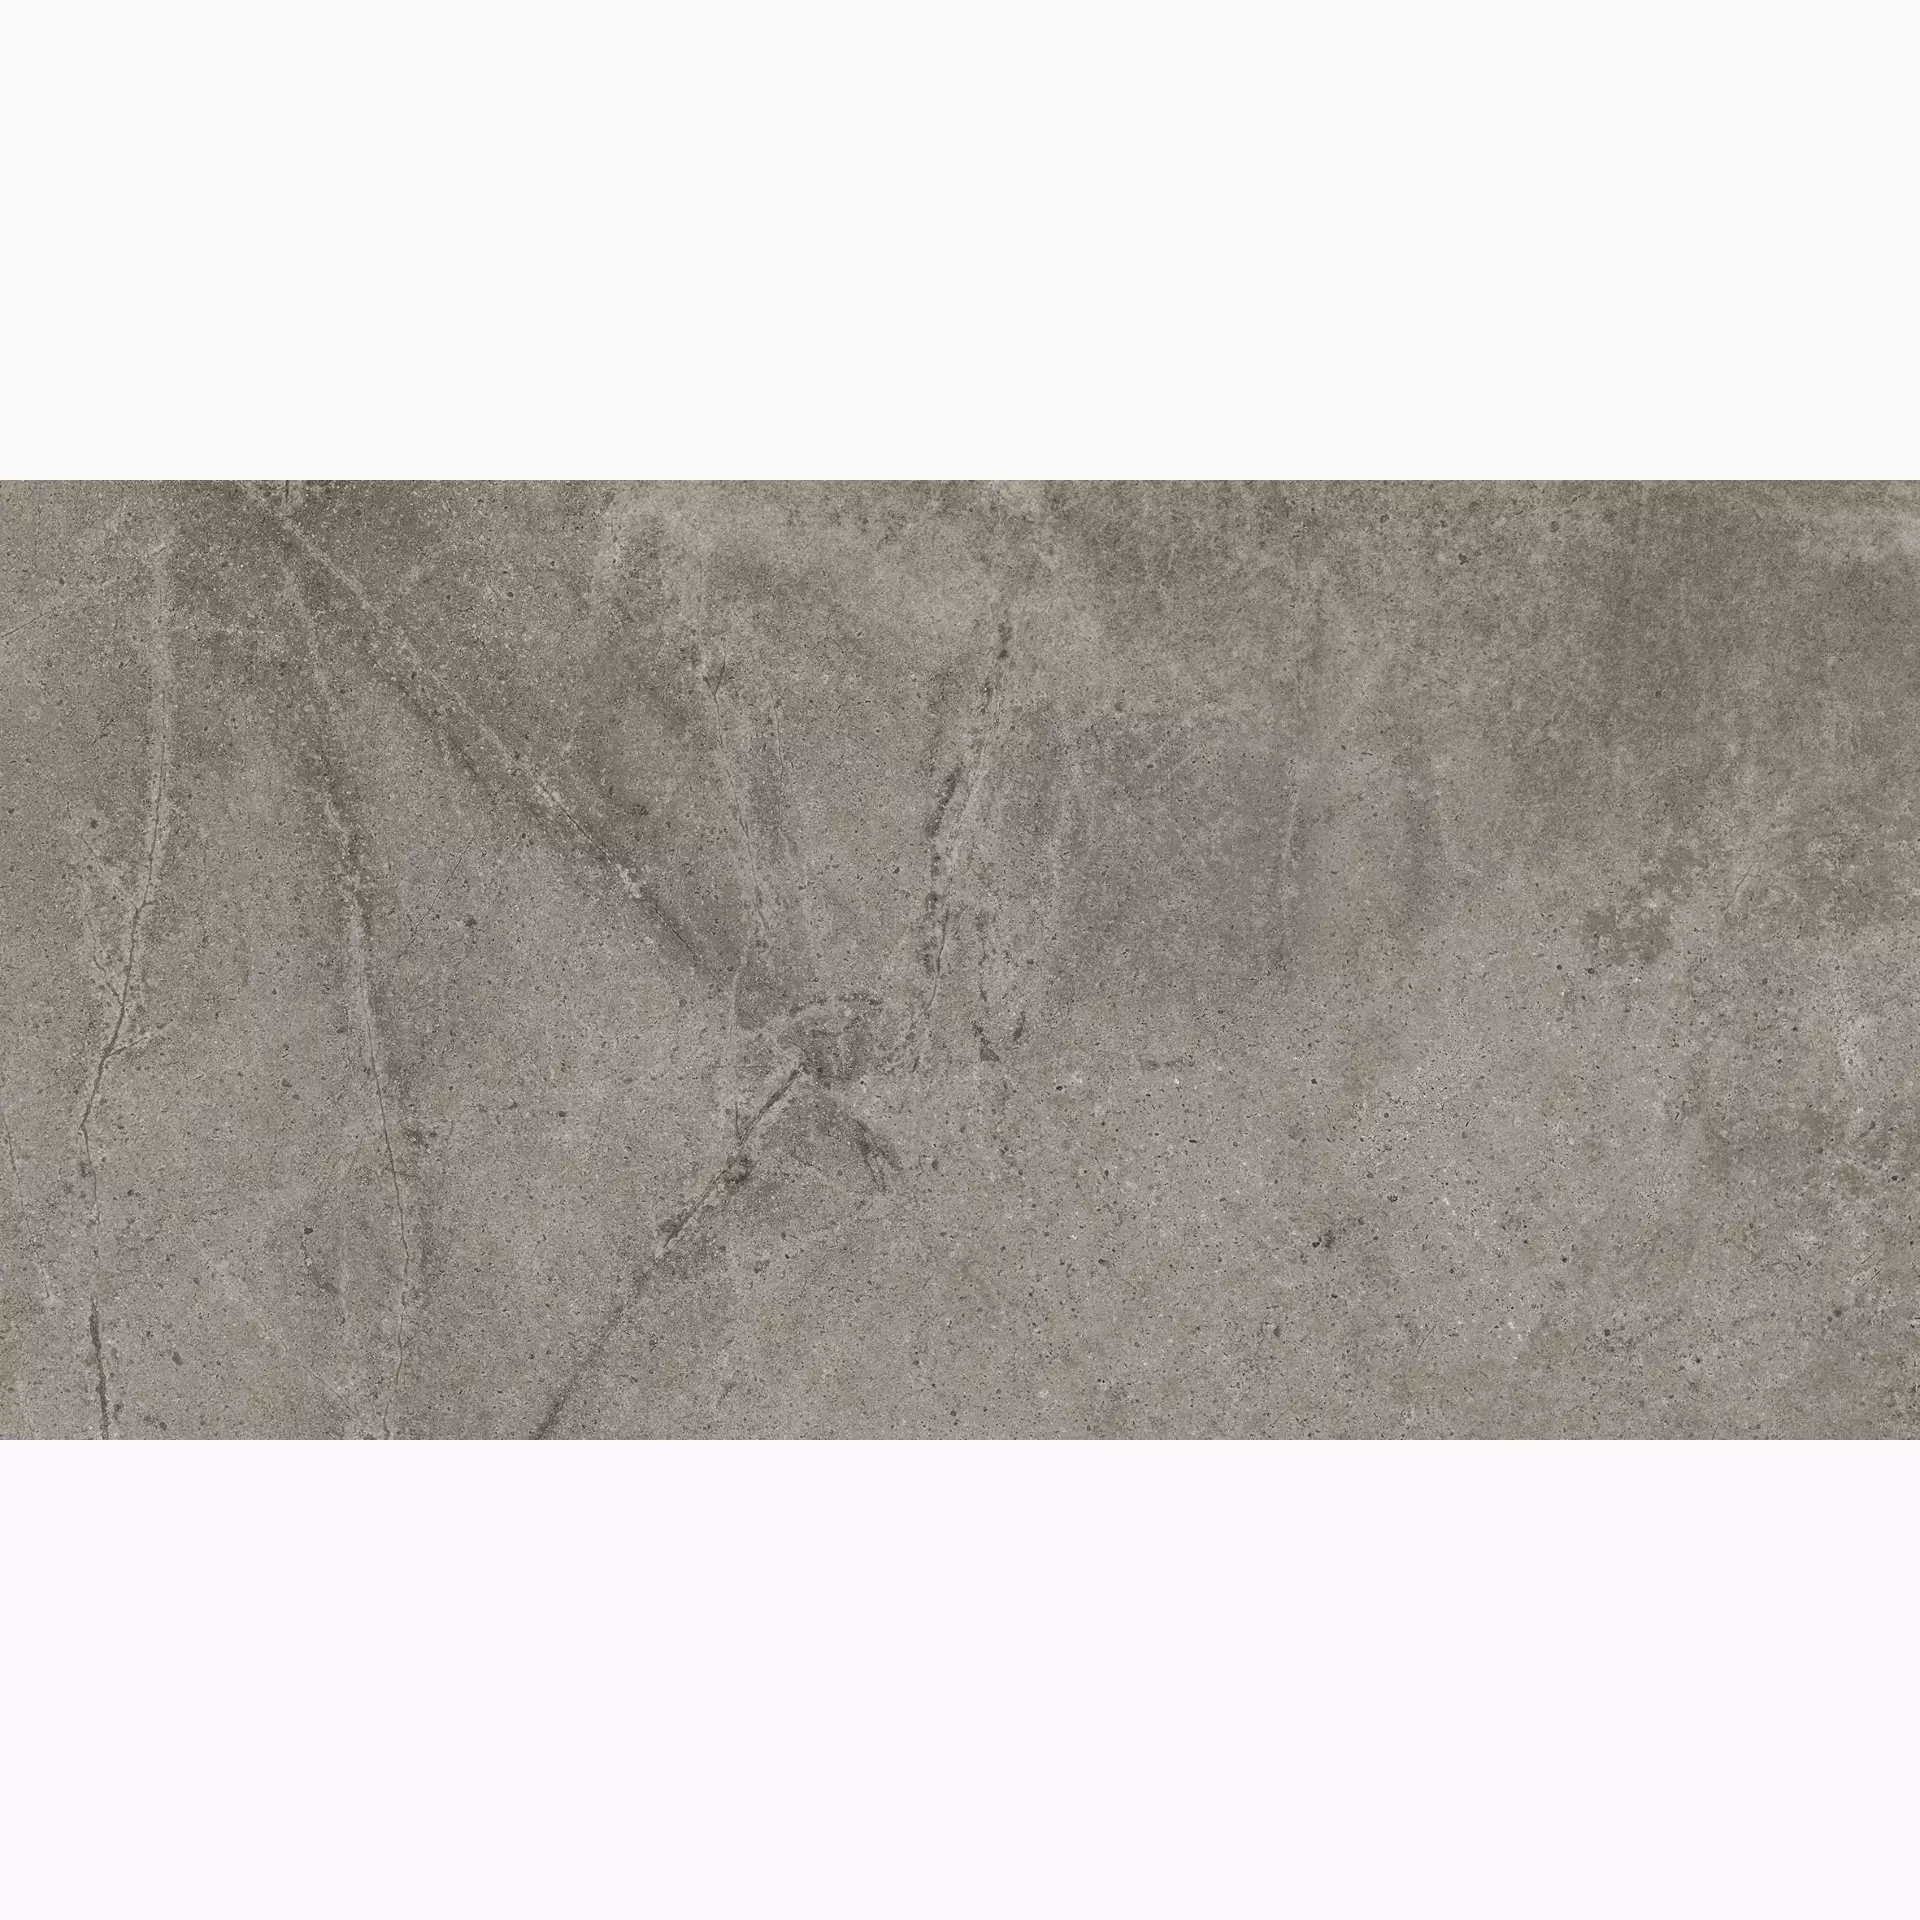 ABK Atlantis Taupe Naturale PF60006917 30x60cm rectified 8,5mm